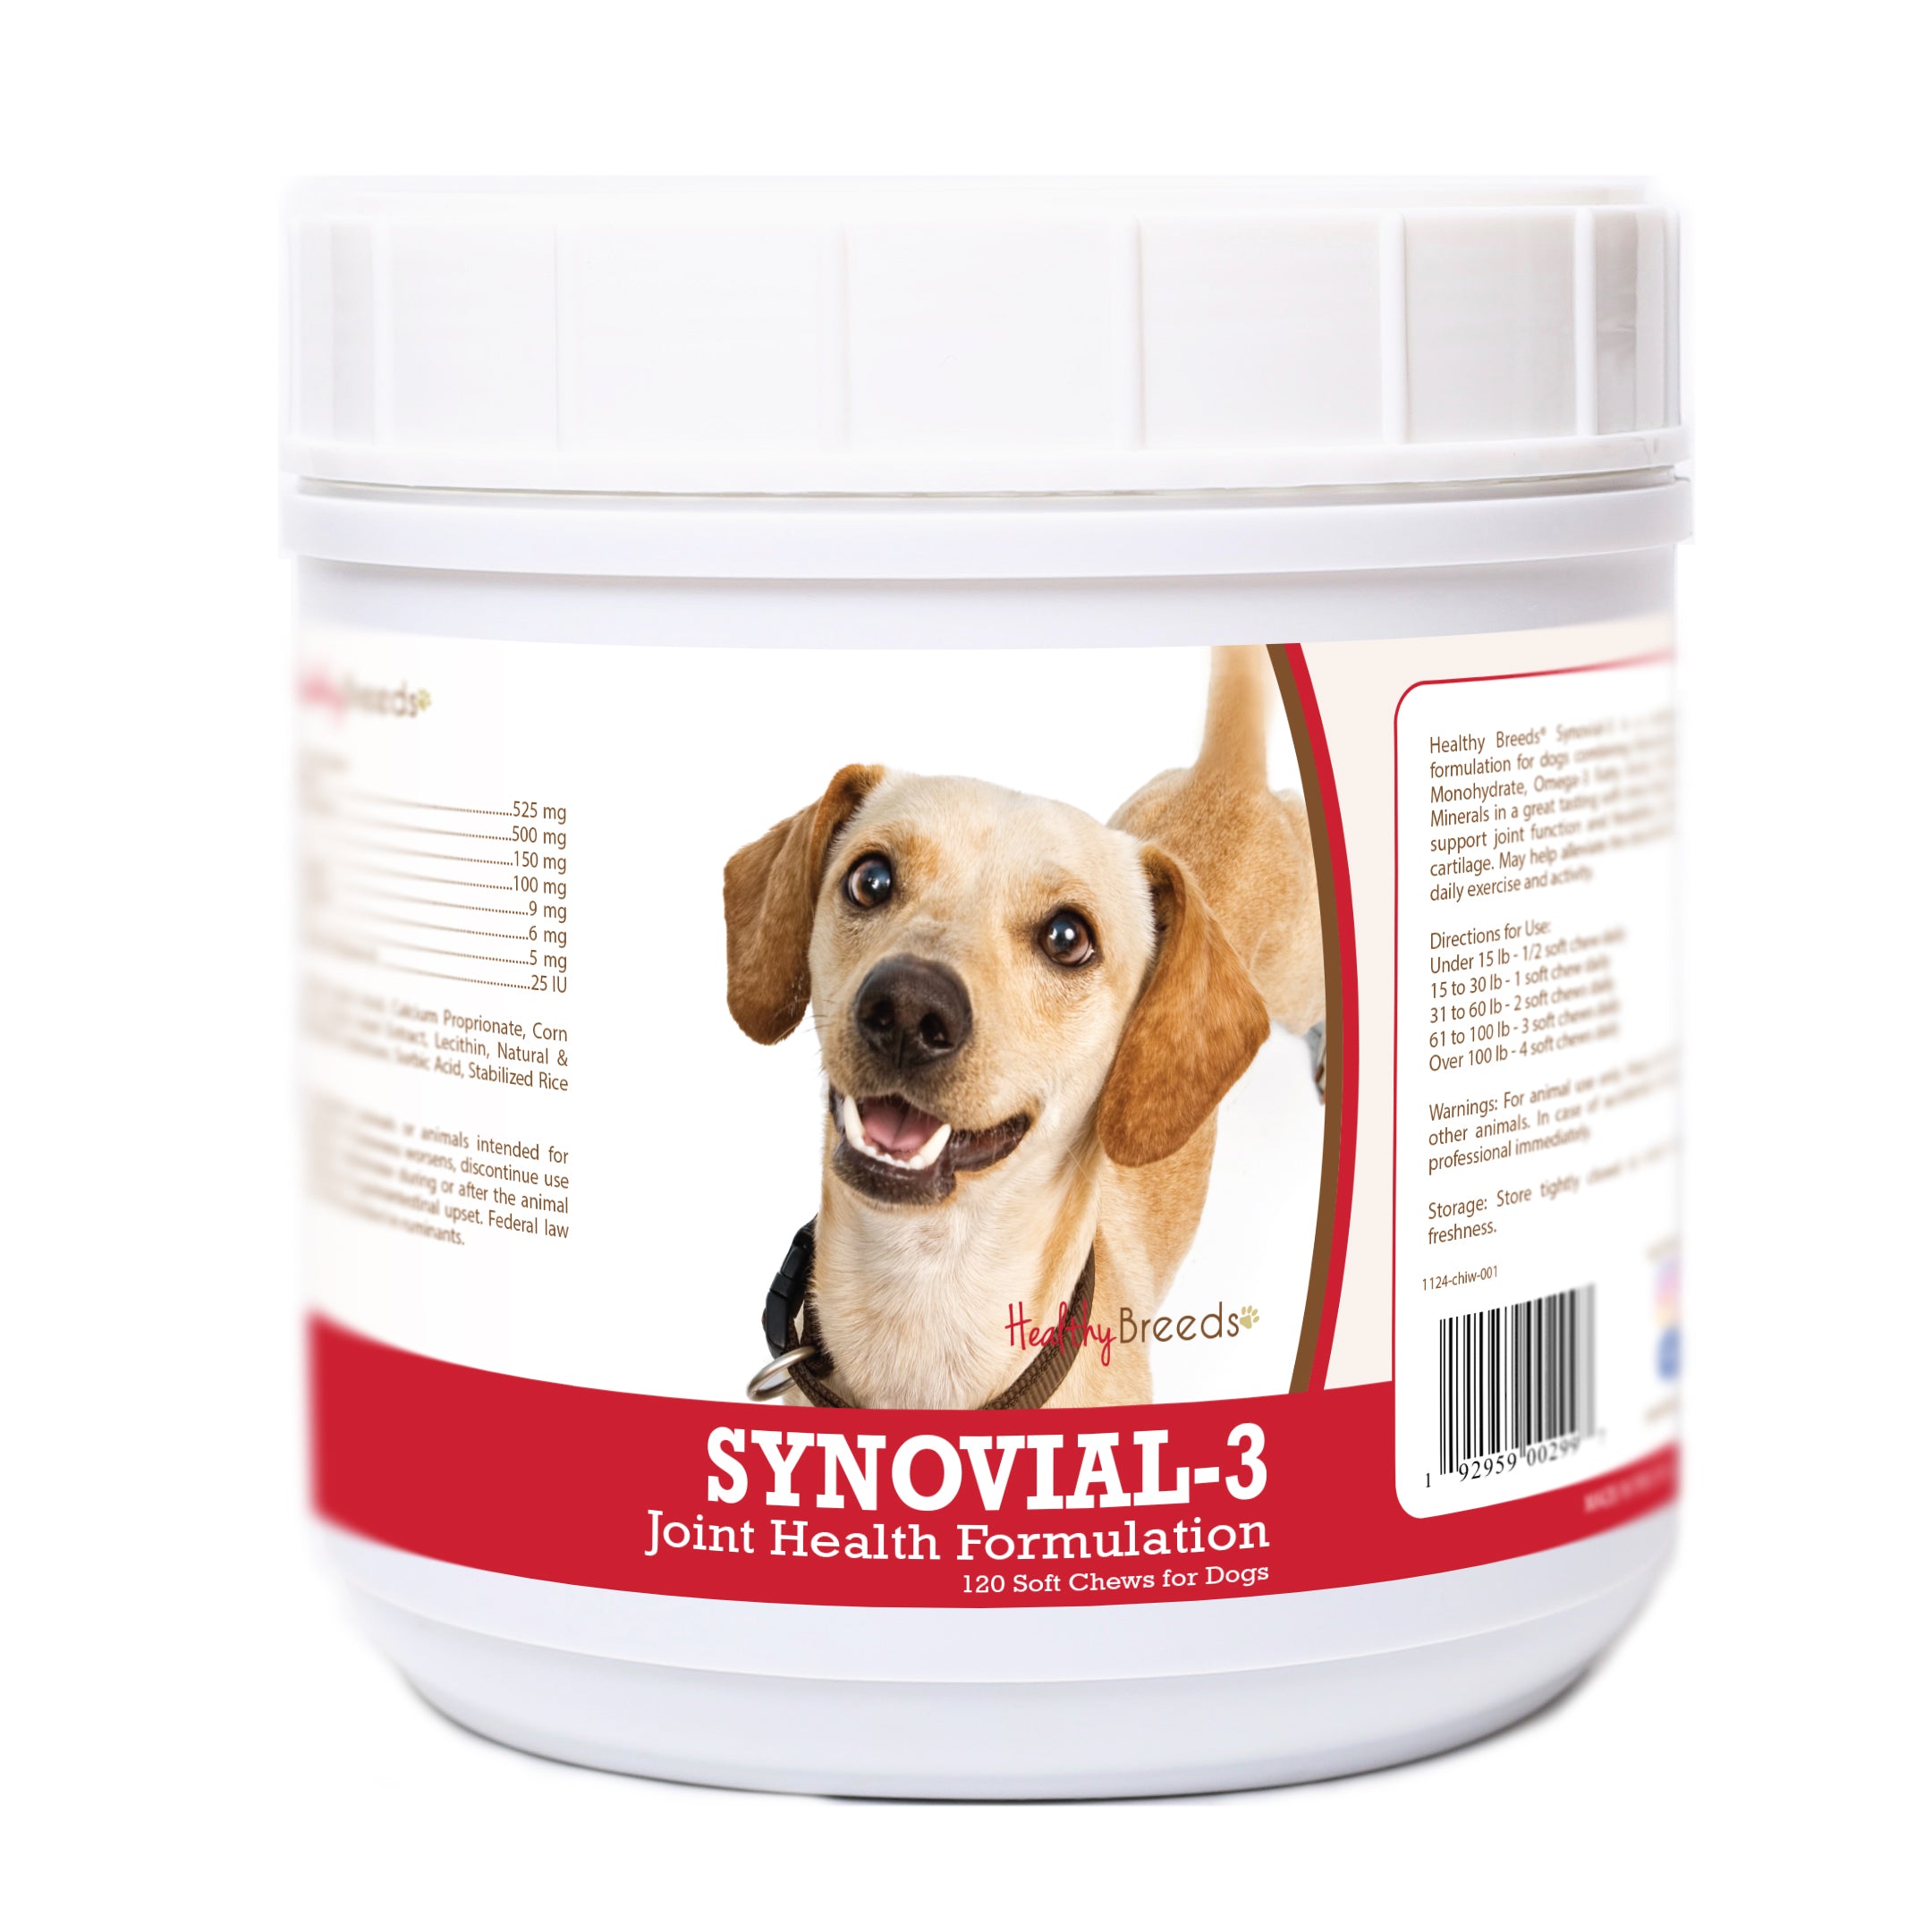 Chiweenie Synovial-3 Joint Health Formulation Soft Chews 120 Count